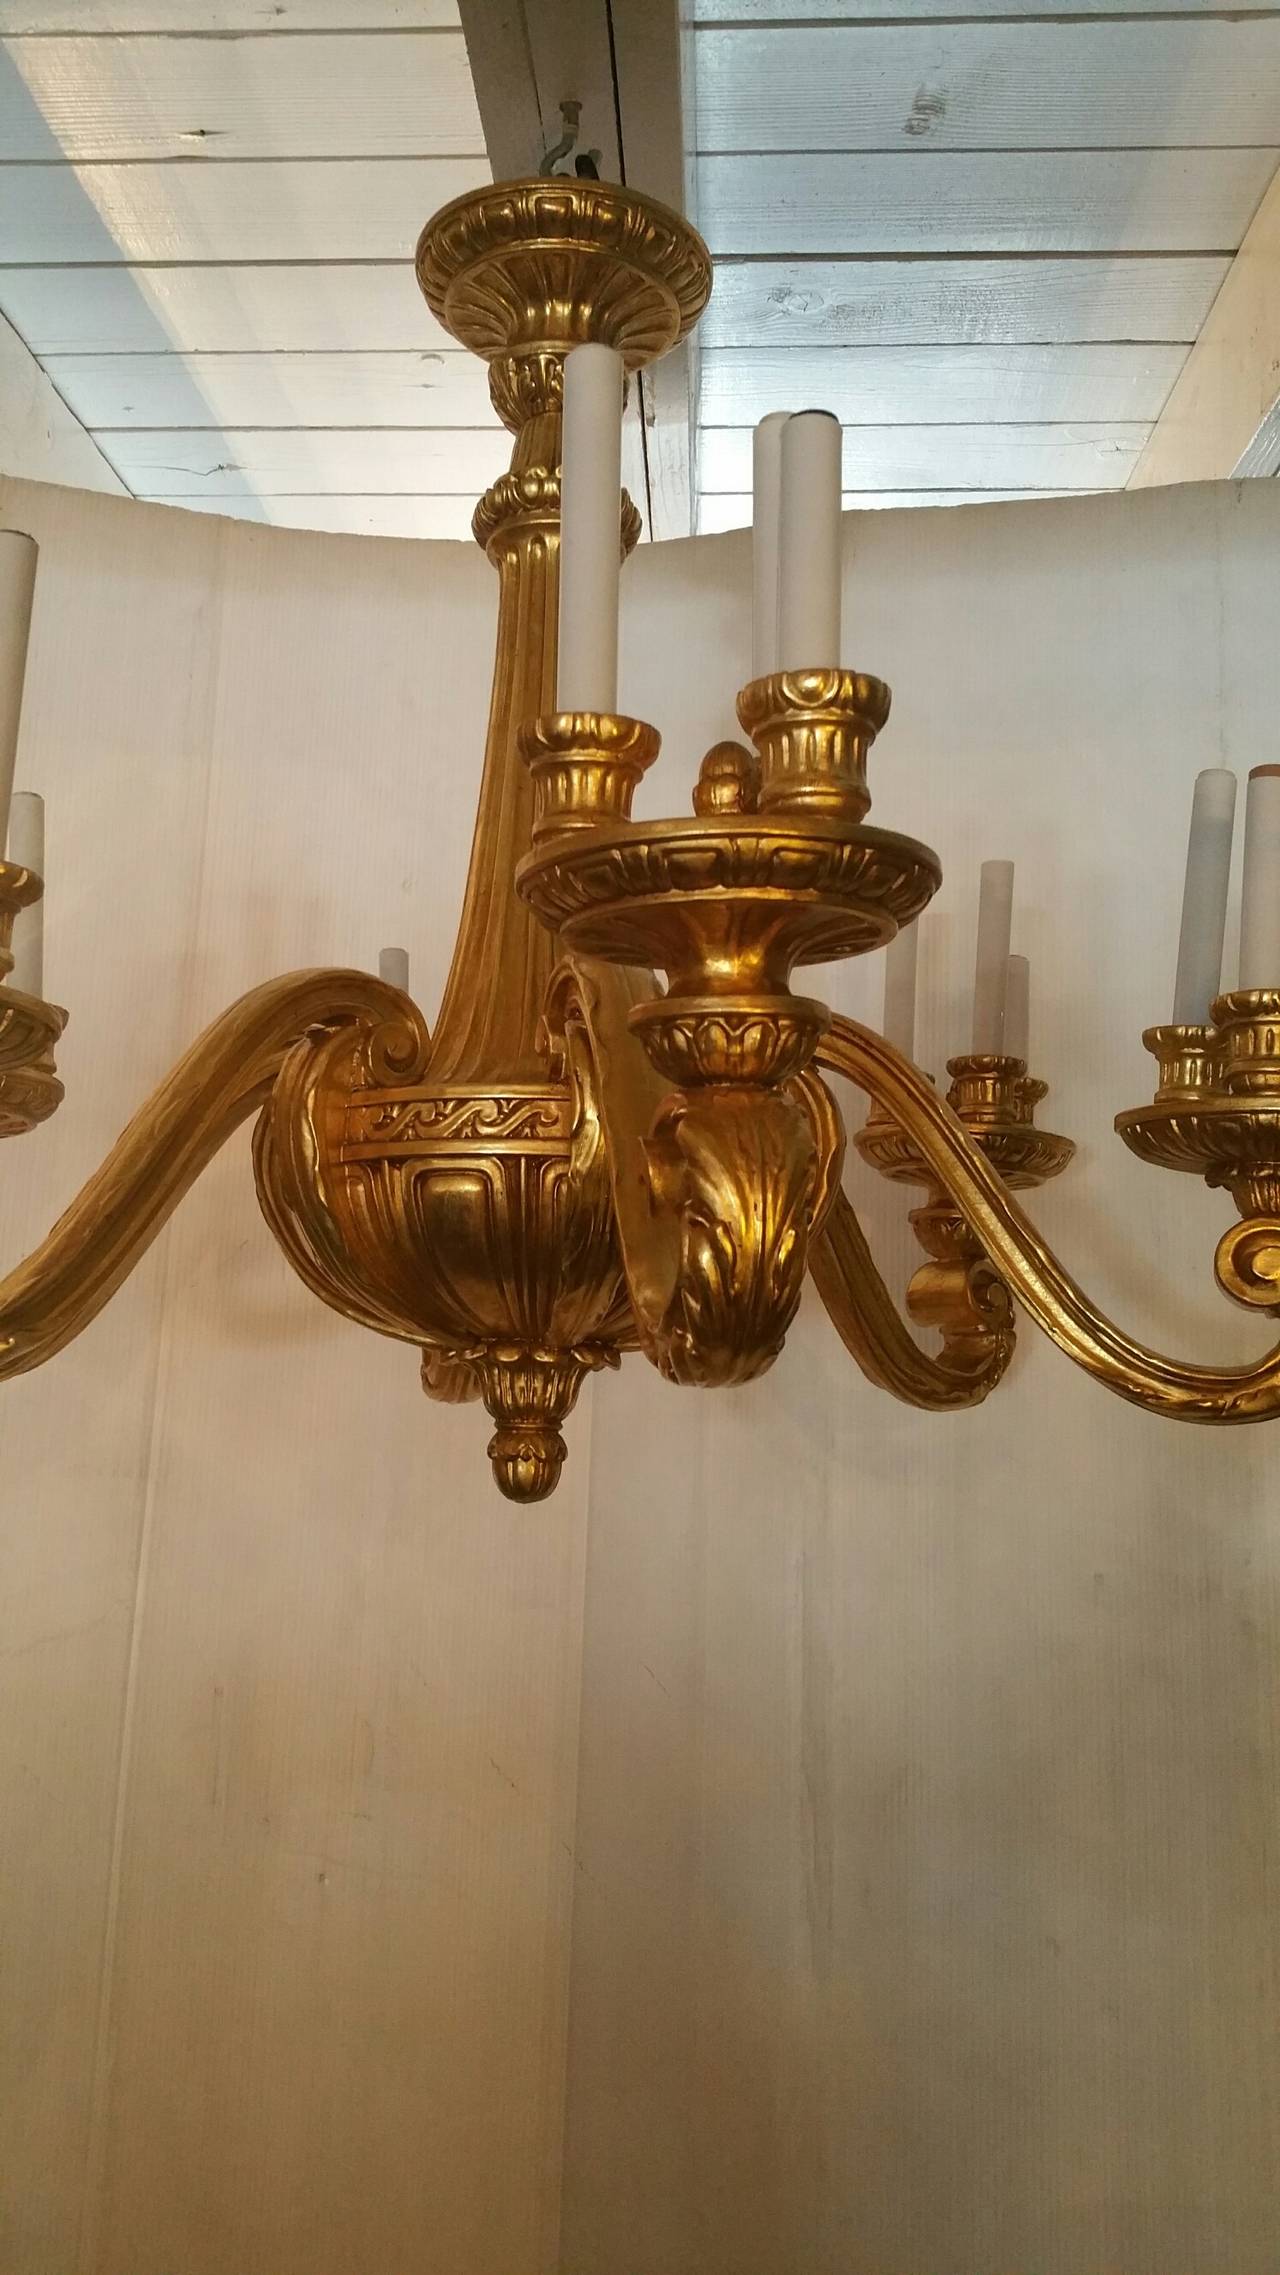 Hand-carved 19th century chandelier. 
Newly gold-leafed and rewired. 
Six arms.
18 lights.